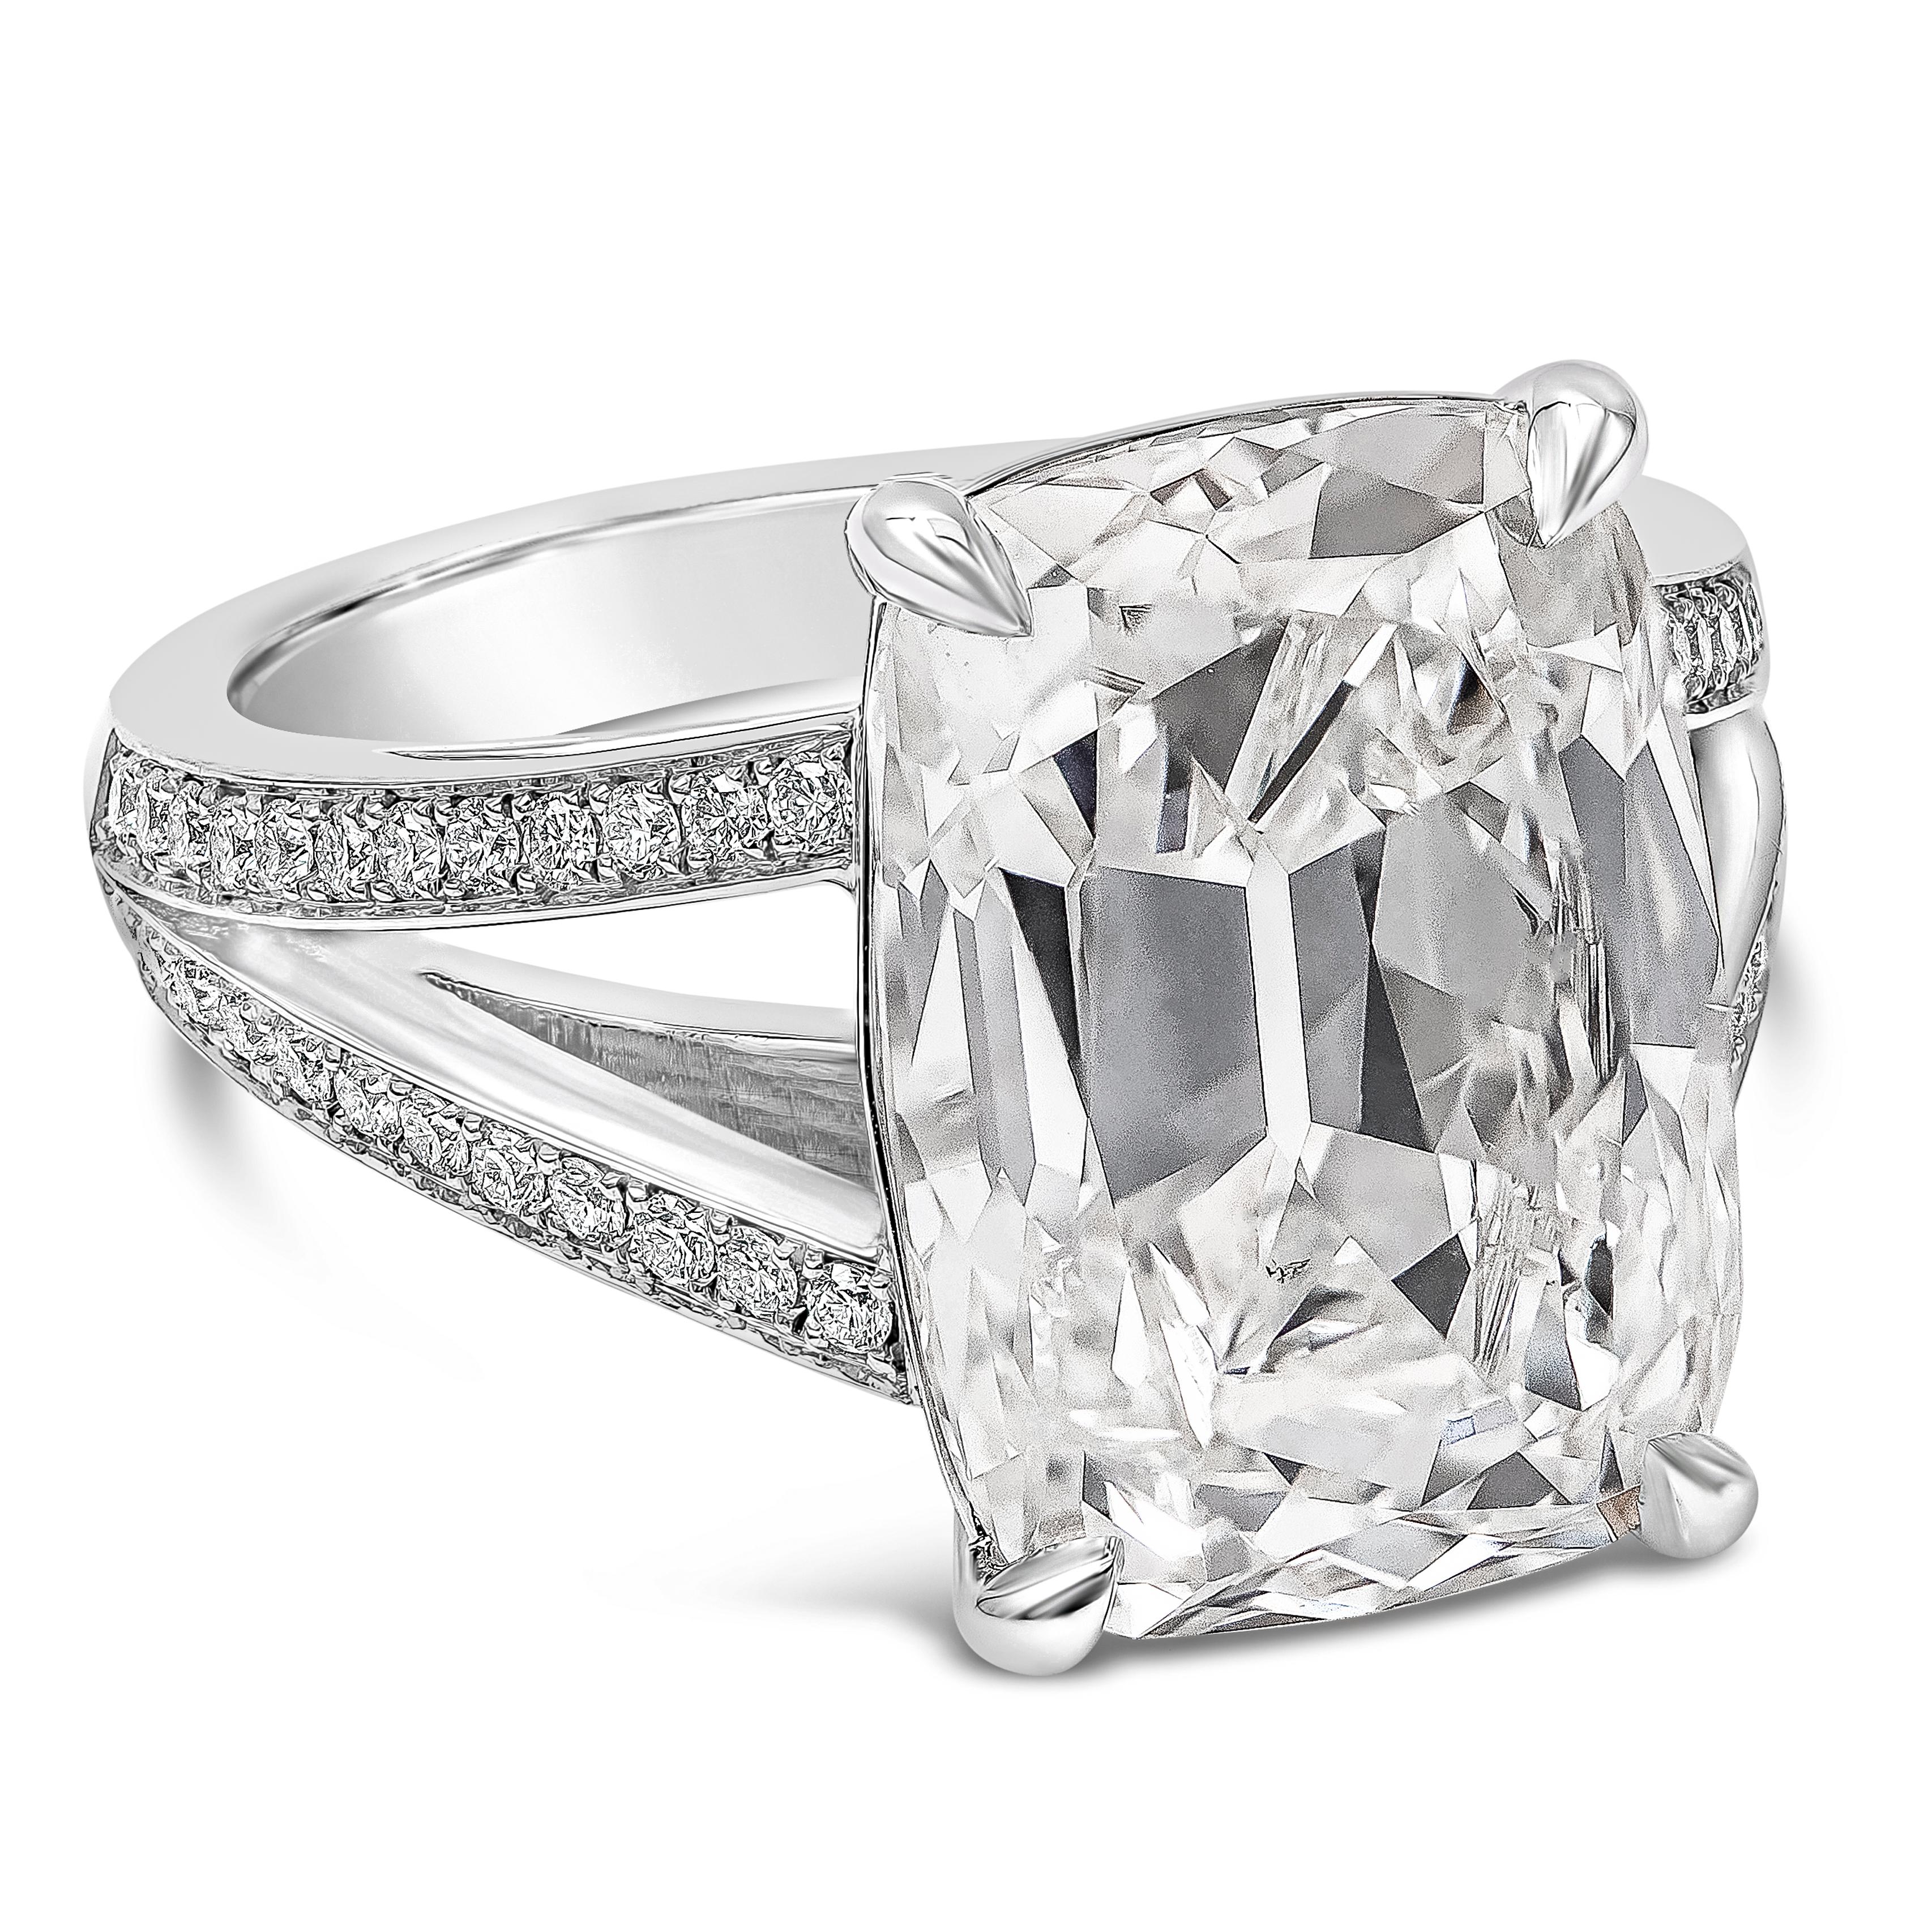 A beautiful engagement ring style showcasing a GIA Certified 10.09 carats elongated cushion cut diamond, I Color and SI1 in clarity. The center diamond is set in four prong and a handcrafted split-shank setting accented with round brilliant diamonds